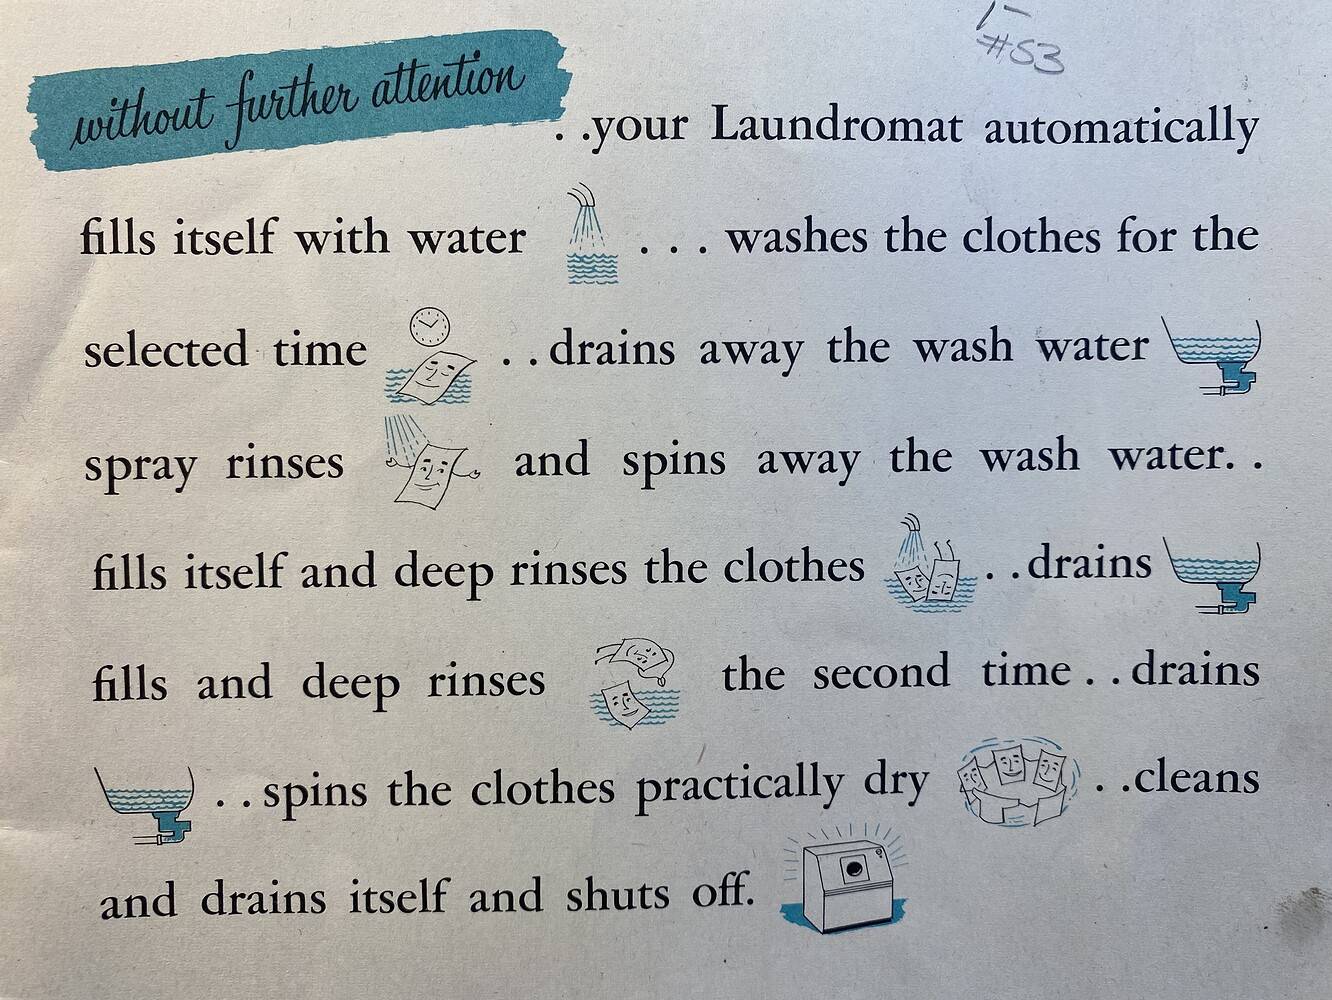 An excerpt from a Mid-Century brochure for a laundry washing machine. Featuring several clip art illustrations showing features of the machine such as that it fills and drains itself. The image is primarily black and white, but has blue accents throughout.